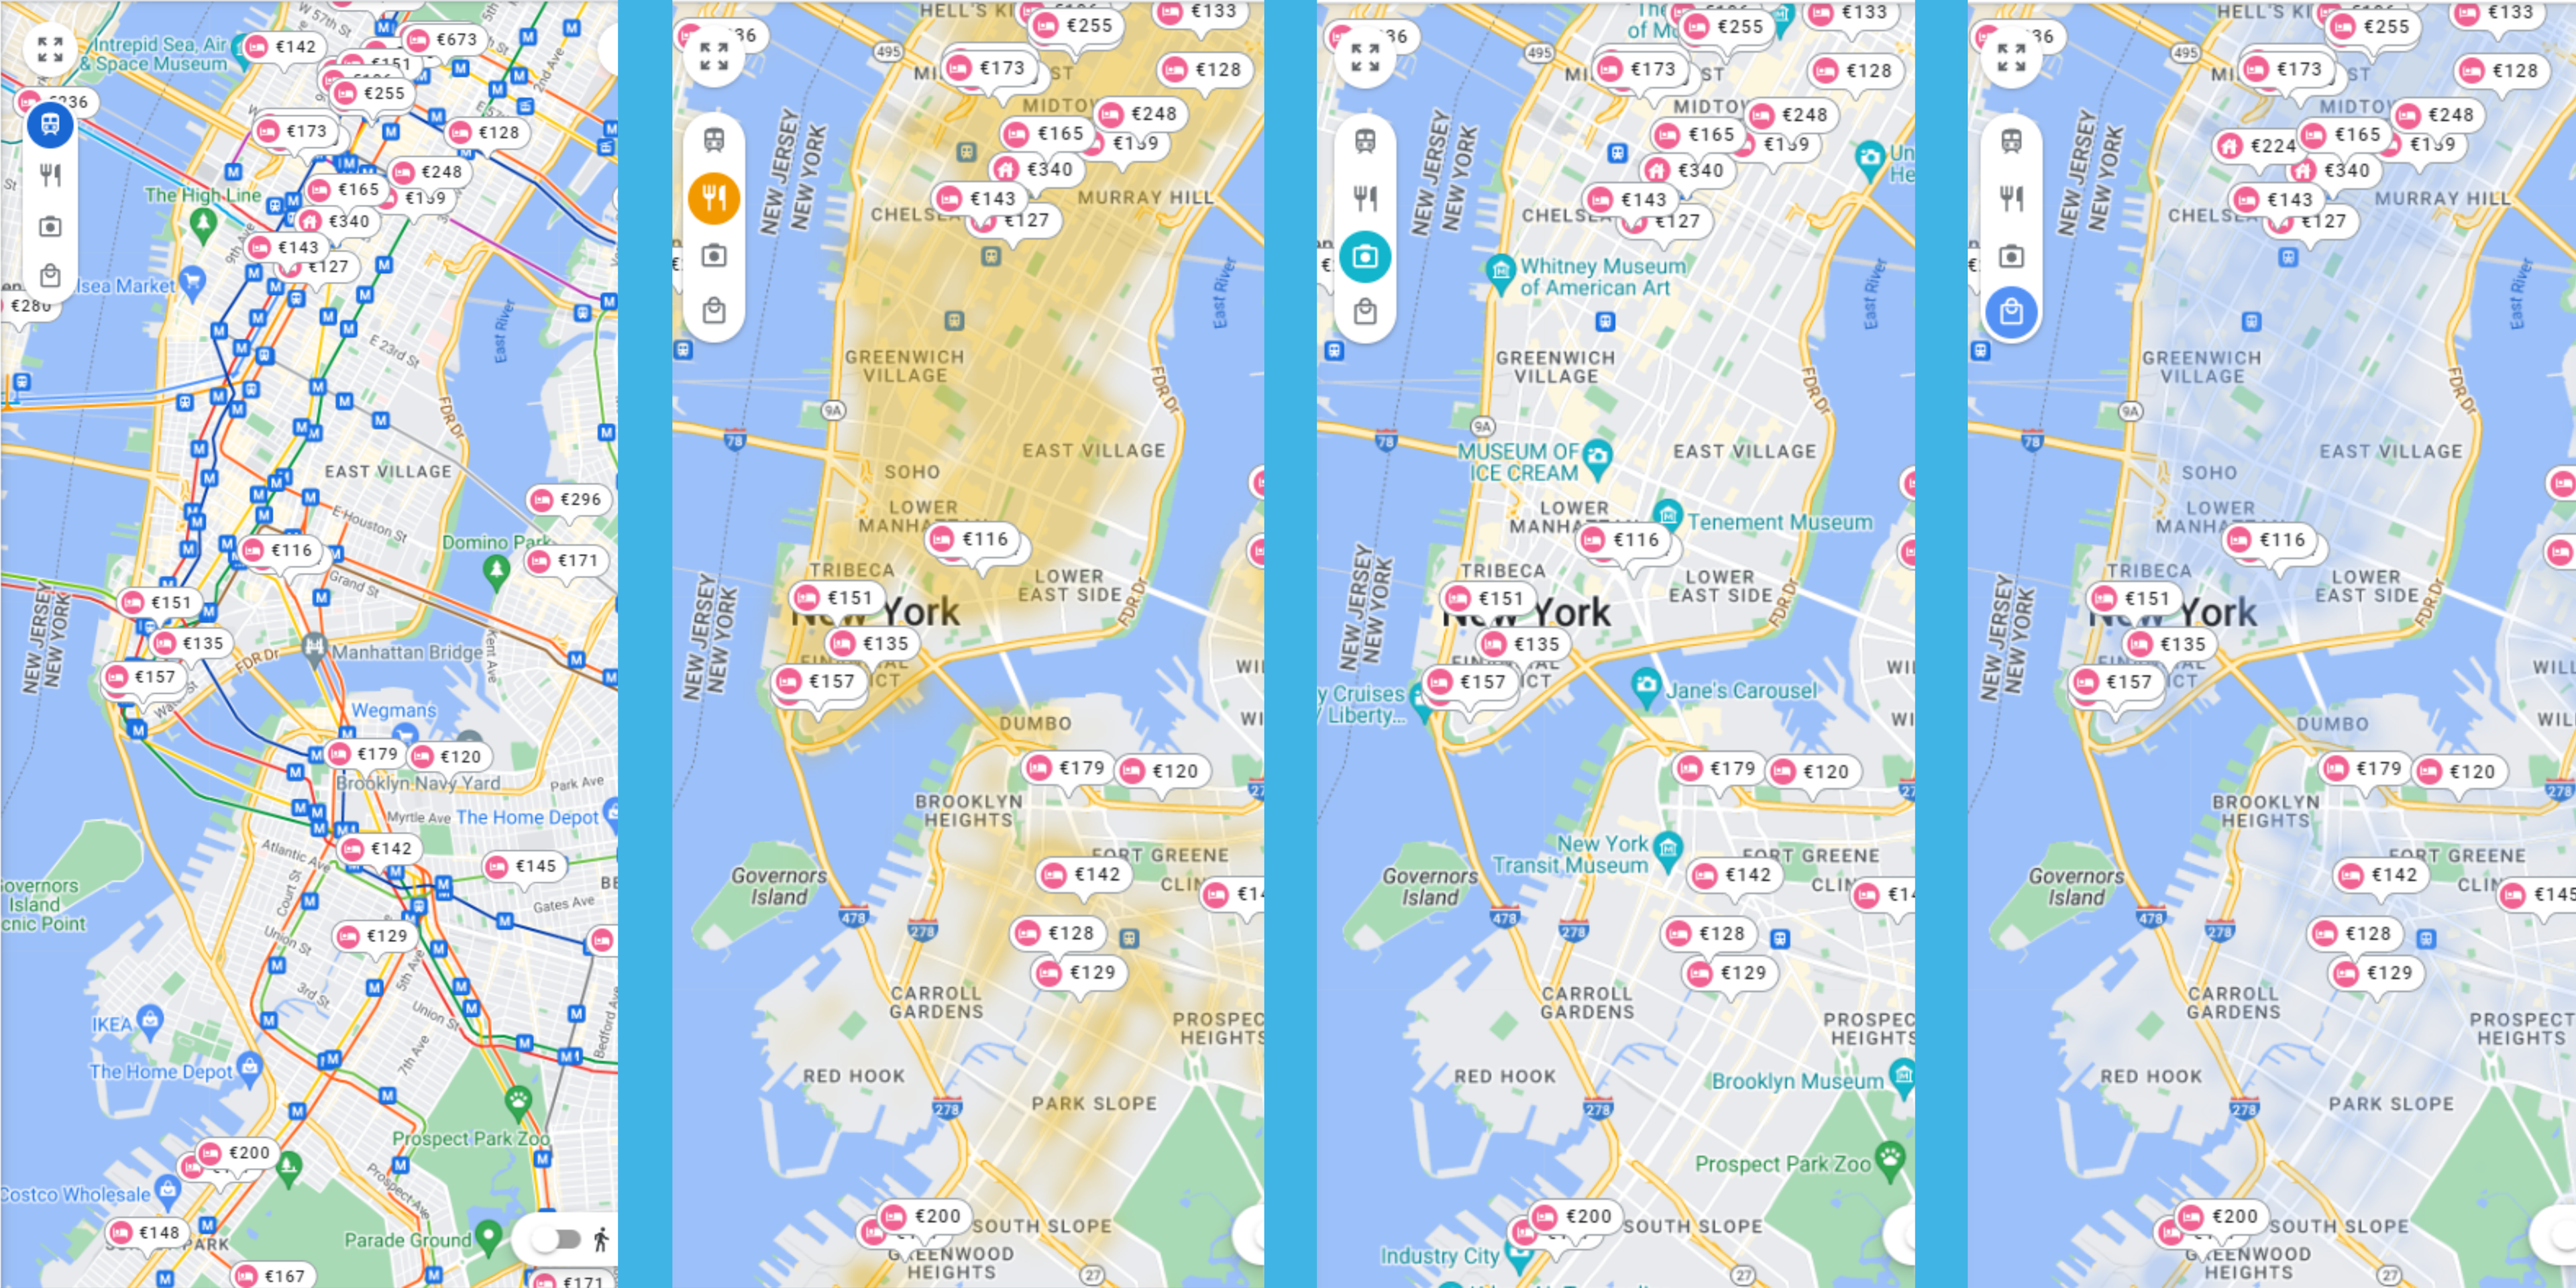 4 options of the interactive map in google hotels